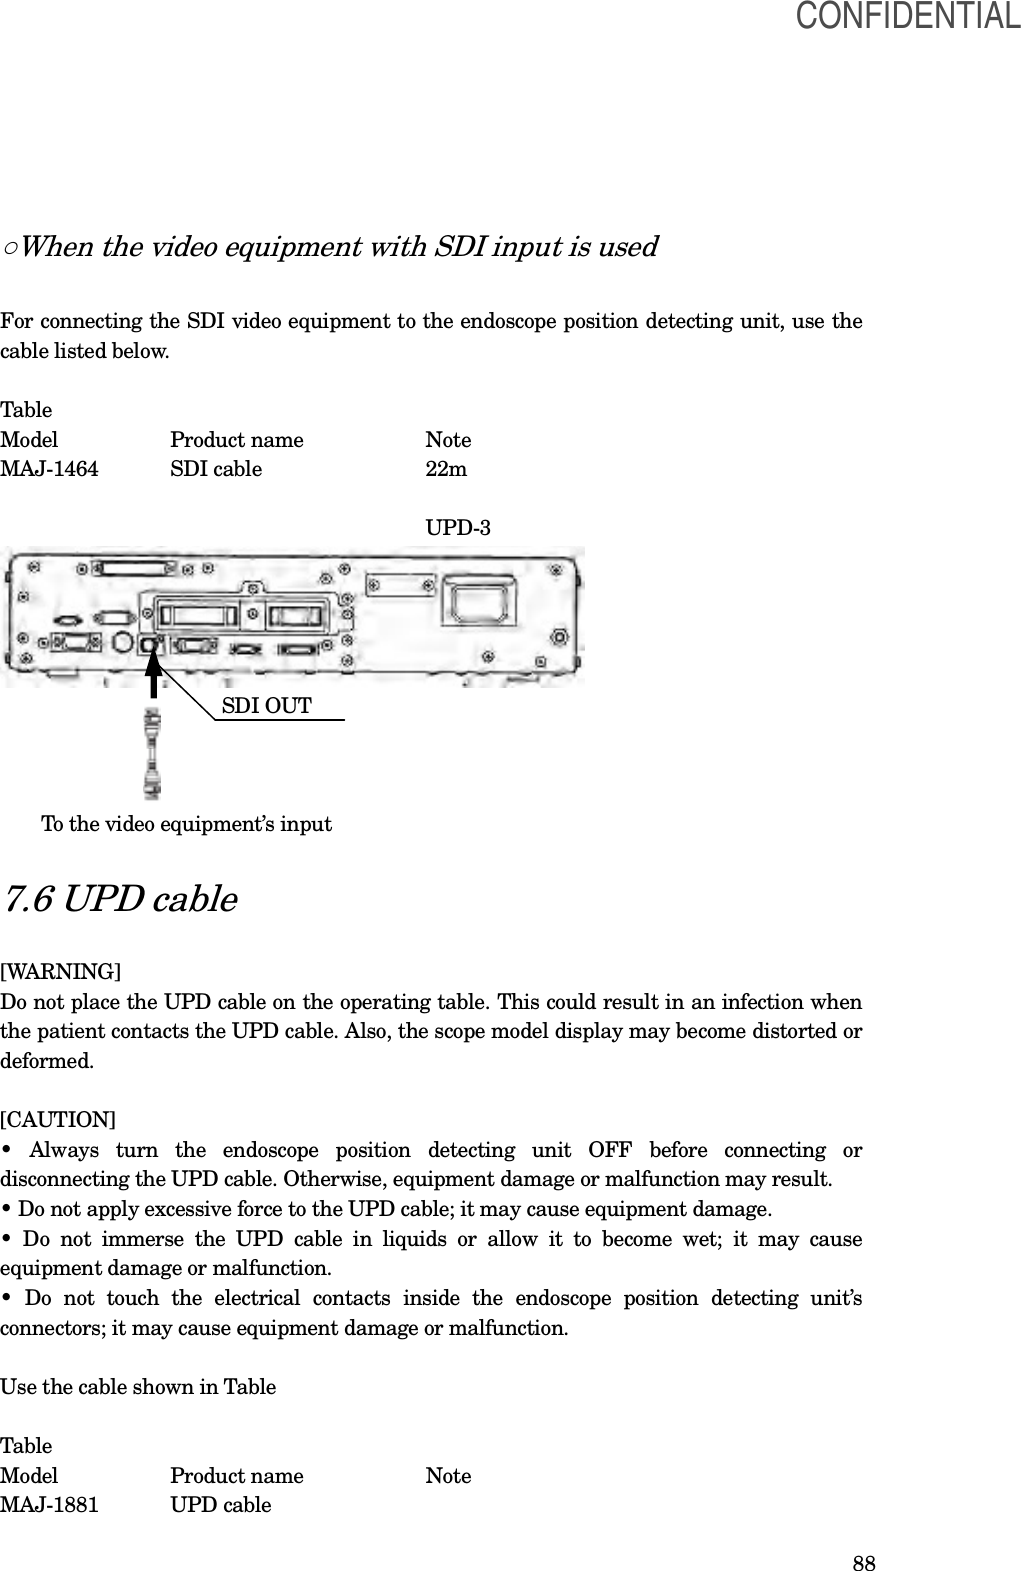  88 ○When the video equipment with SDI input is used  For connecting the SDI video equipment to the endoscope position detecting unit, use the cable listed below.  Table Model    Product name      Note   MAJ-1464  SDI cable    22m                                   UPD-3                                    MAJ-1464                 SDI OUT            To the video equipment’s input  7.6 UPD cable  [WARNING] Do not place the UPD cable on the operating table. This could result in an infection when the patient contacts the UPD cable. Also, the scope model display may become distorted or deformed.  [CAUTION] •  Always  turn  the  endoscope  position  detecting  unit  OFF  before  connecting  or disconnecting the UPD cable. Otherwise, equipment damage or malfunction may result. • Do not apply excessive force to the UPD cable; it may cause equipment damage. • Do not  immerse  the  UPD  cable  in  liquids  or  allow  it  to  become  wet;  it  may  cause equipment damage or malfunction. •  Do  not  touch  the  electrical  contacts  inside  the  endoscope  position  detecting  unit’s connectors; it may cause equipment damage or malfunction.  Use the cable shown in Table  Table Model    Product name      Note   MAJ-1881  UPD cable     CONFIDENTIAL